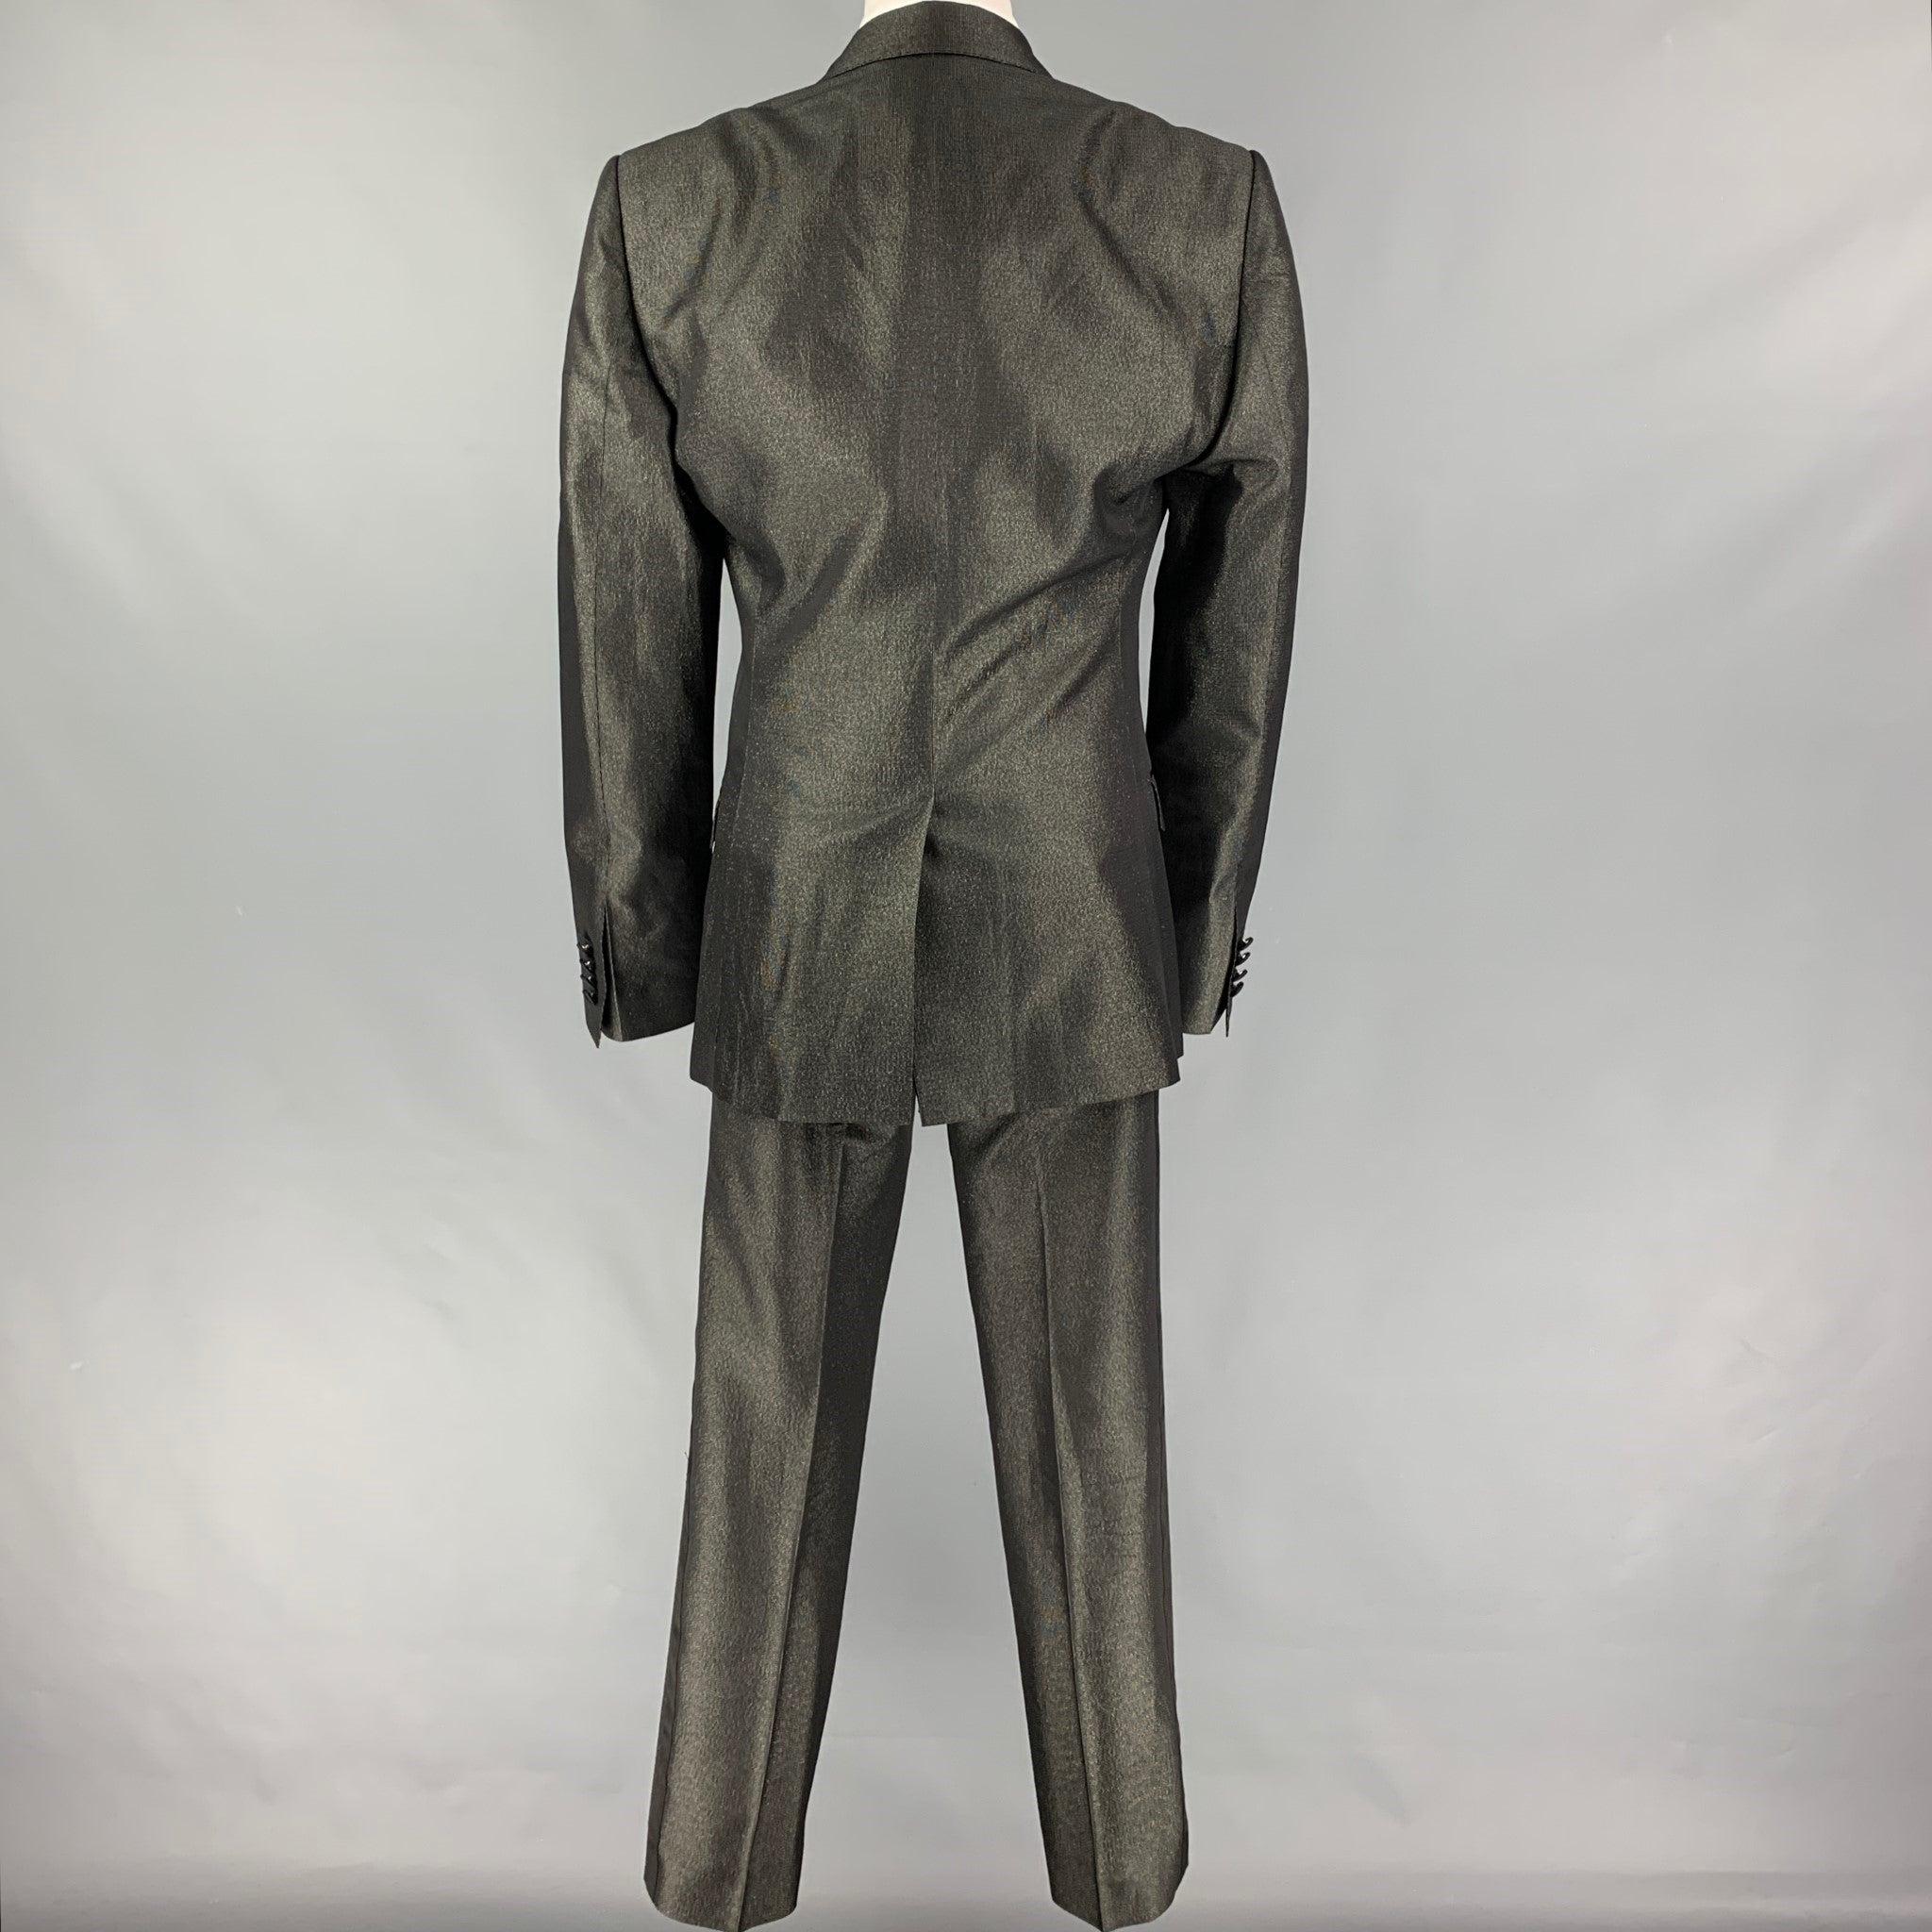 DOLCE & GABBANA Size 36 Black Gold Metallic Acetate Blend 3 Piece Tuxedo Suit In Excellent Condition For Sale In San Francisco, CA